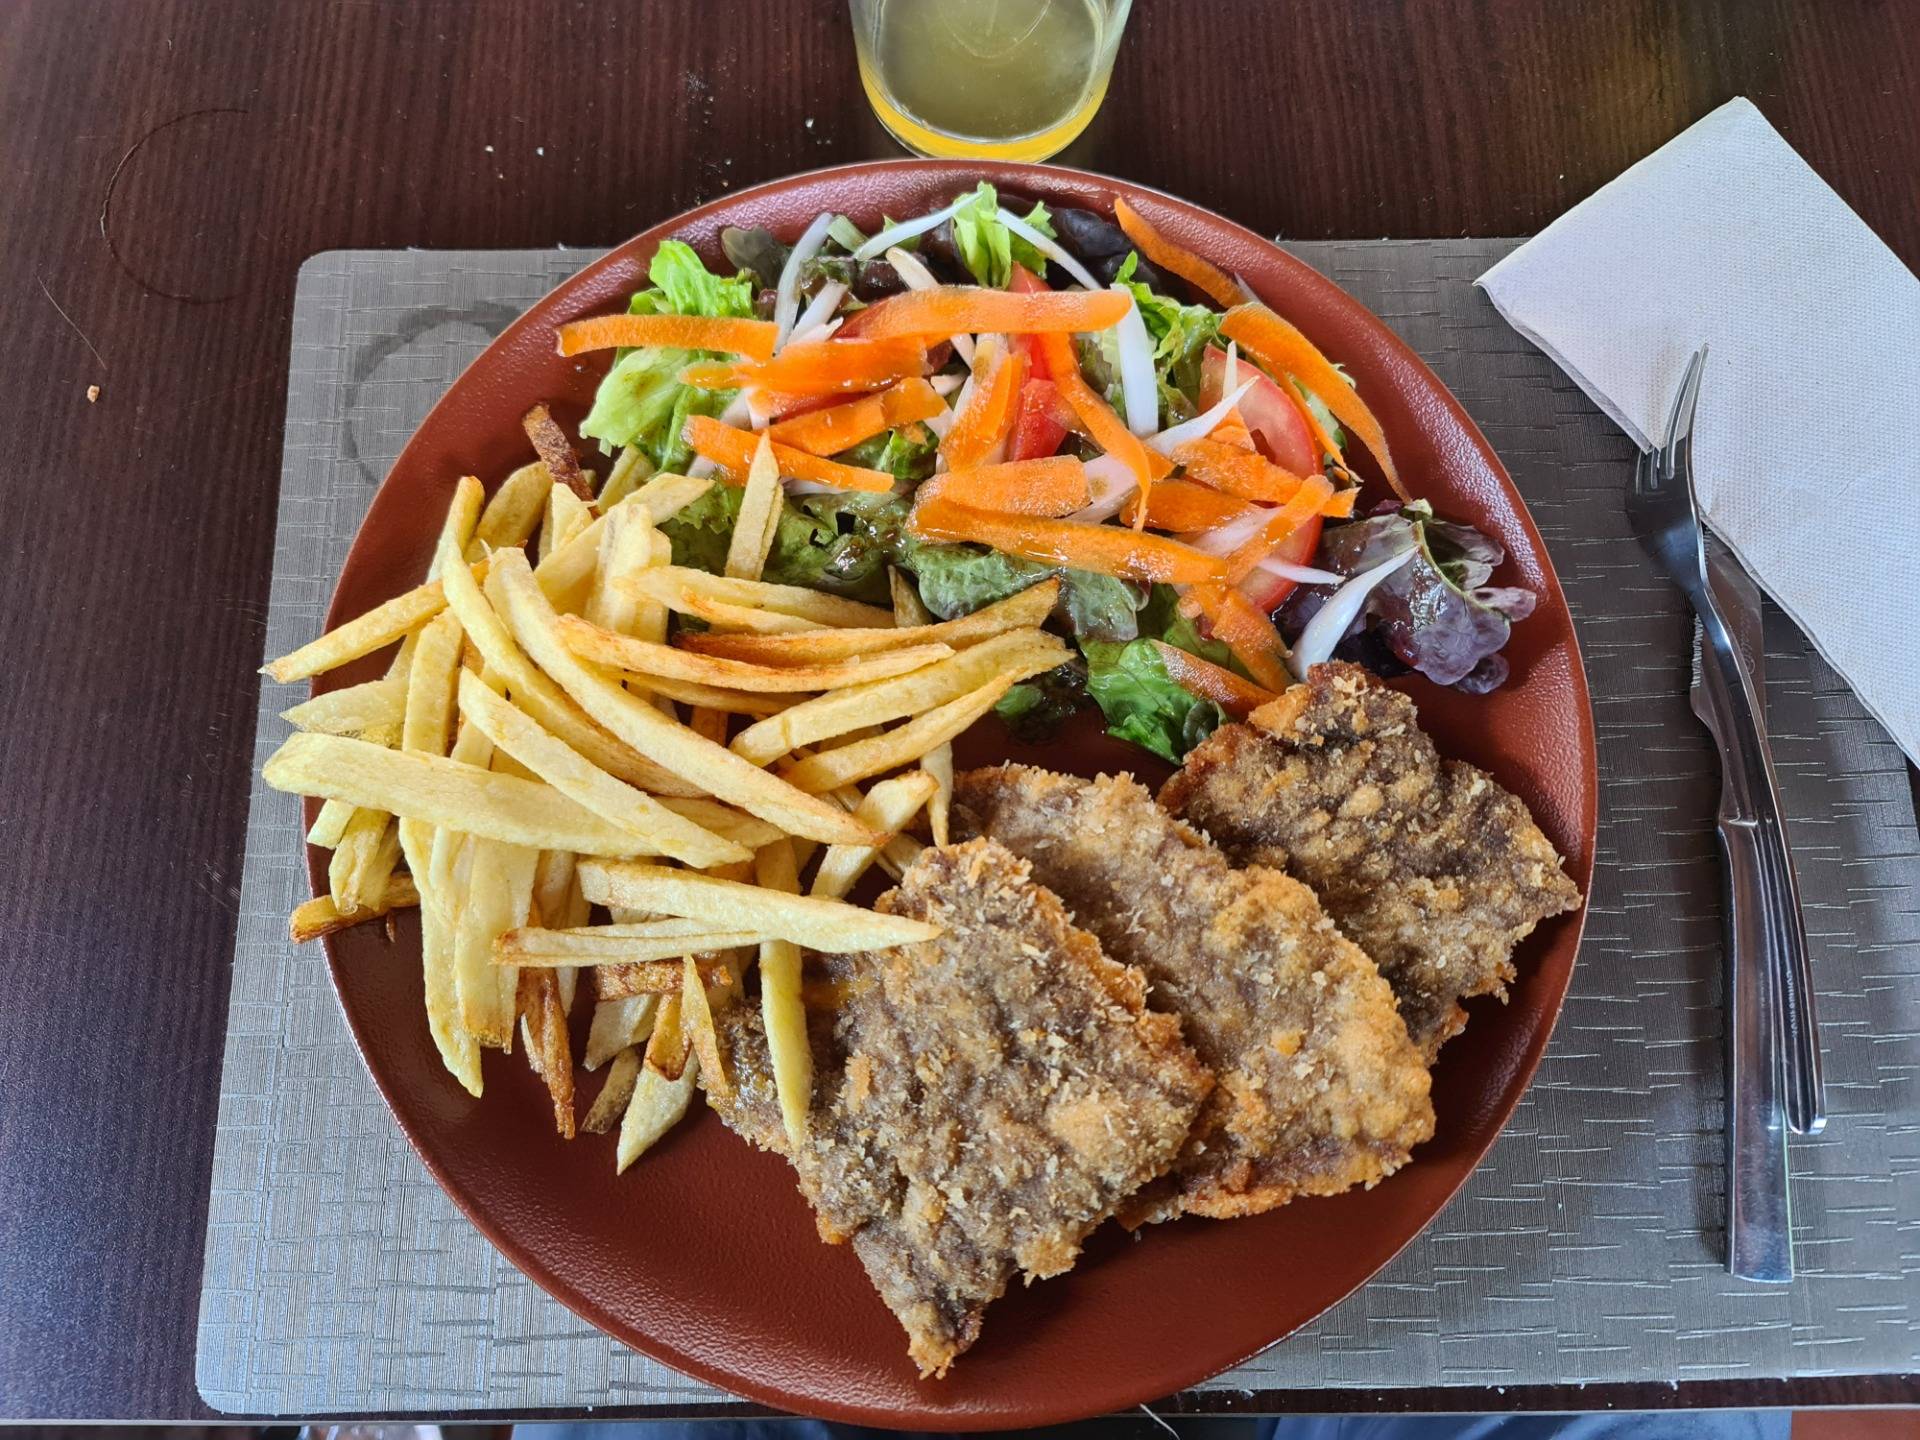 ”Cachopines” (breaded veal fillets stuffed with veal jerky and Valdeón blue cheese), sided with fries and salad and paired with a bottle of natural cider (€16.50 + €4.50) (2).